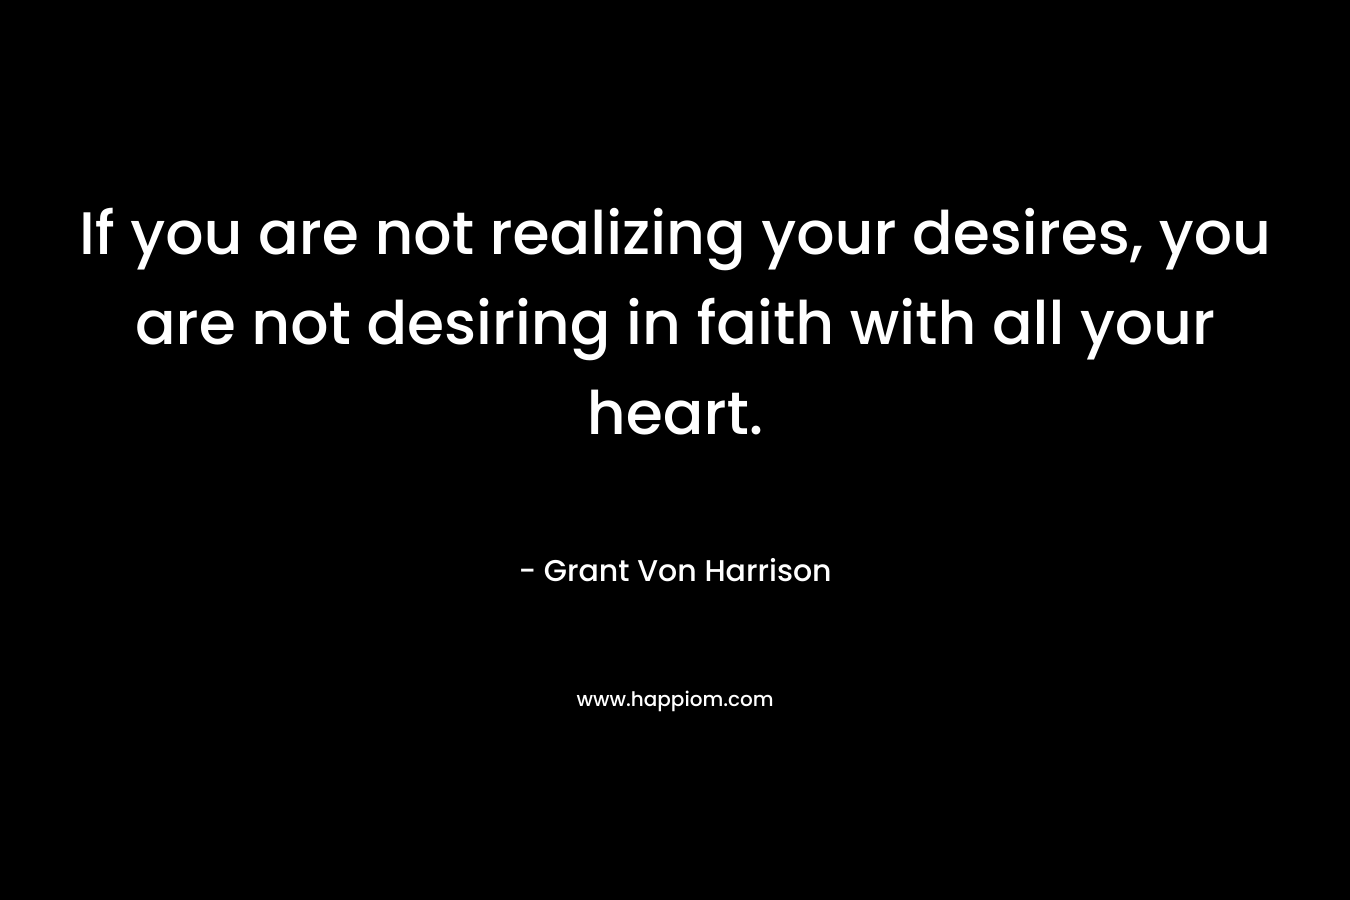 If you are not realizing your desires, you are not desiring in faith with all your heart.